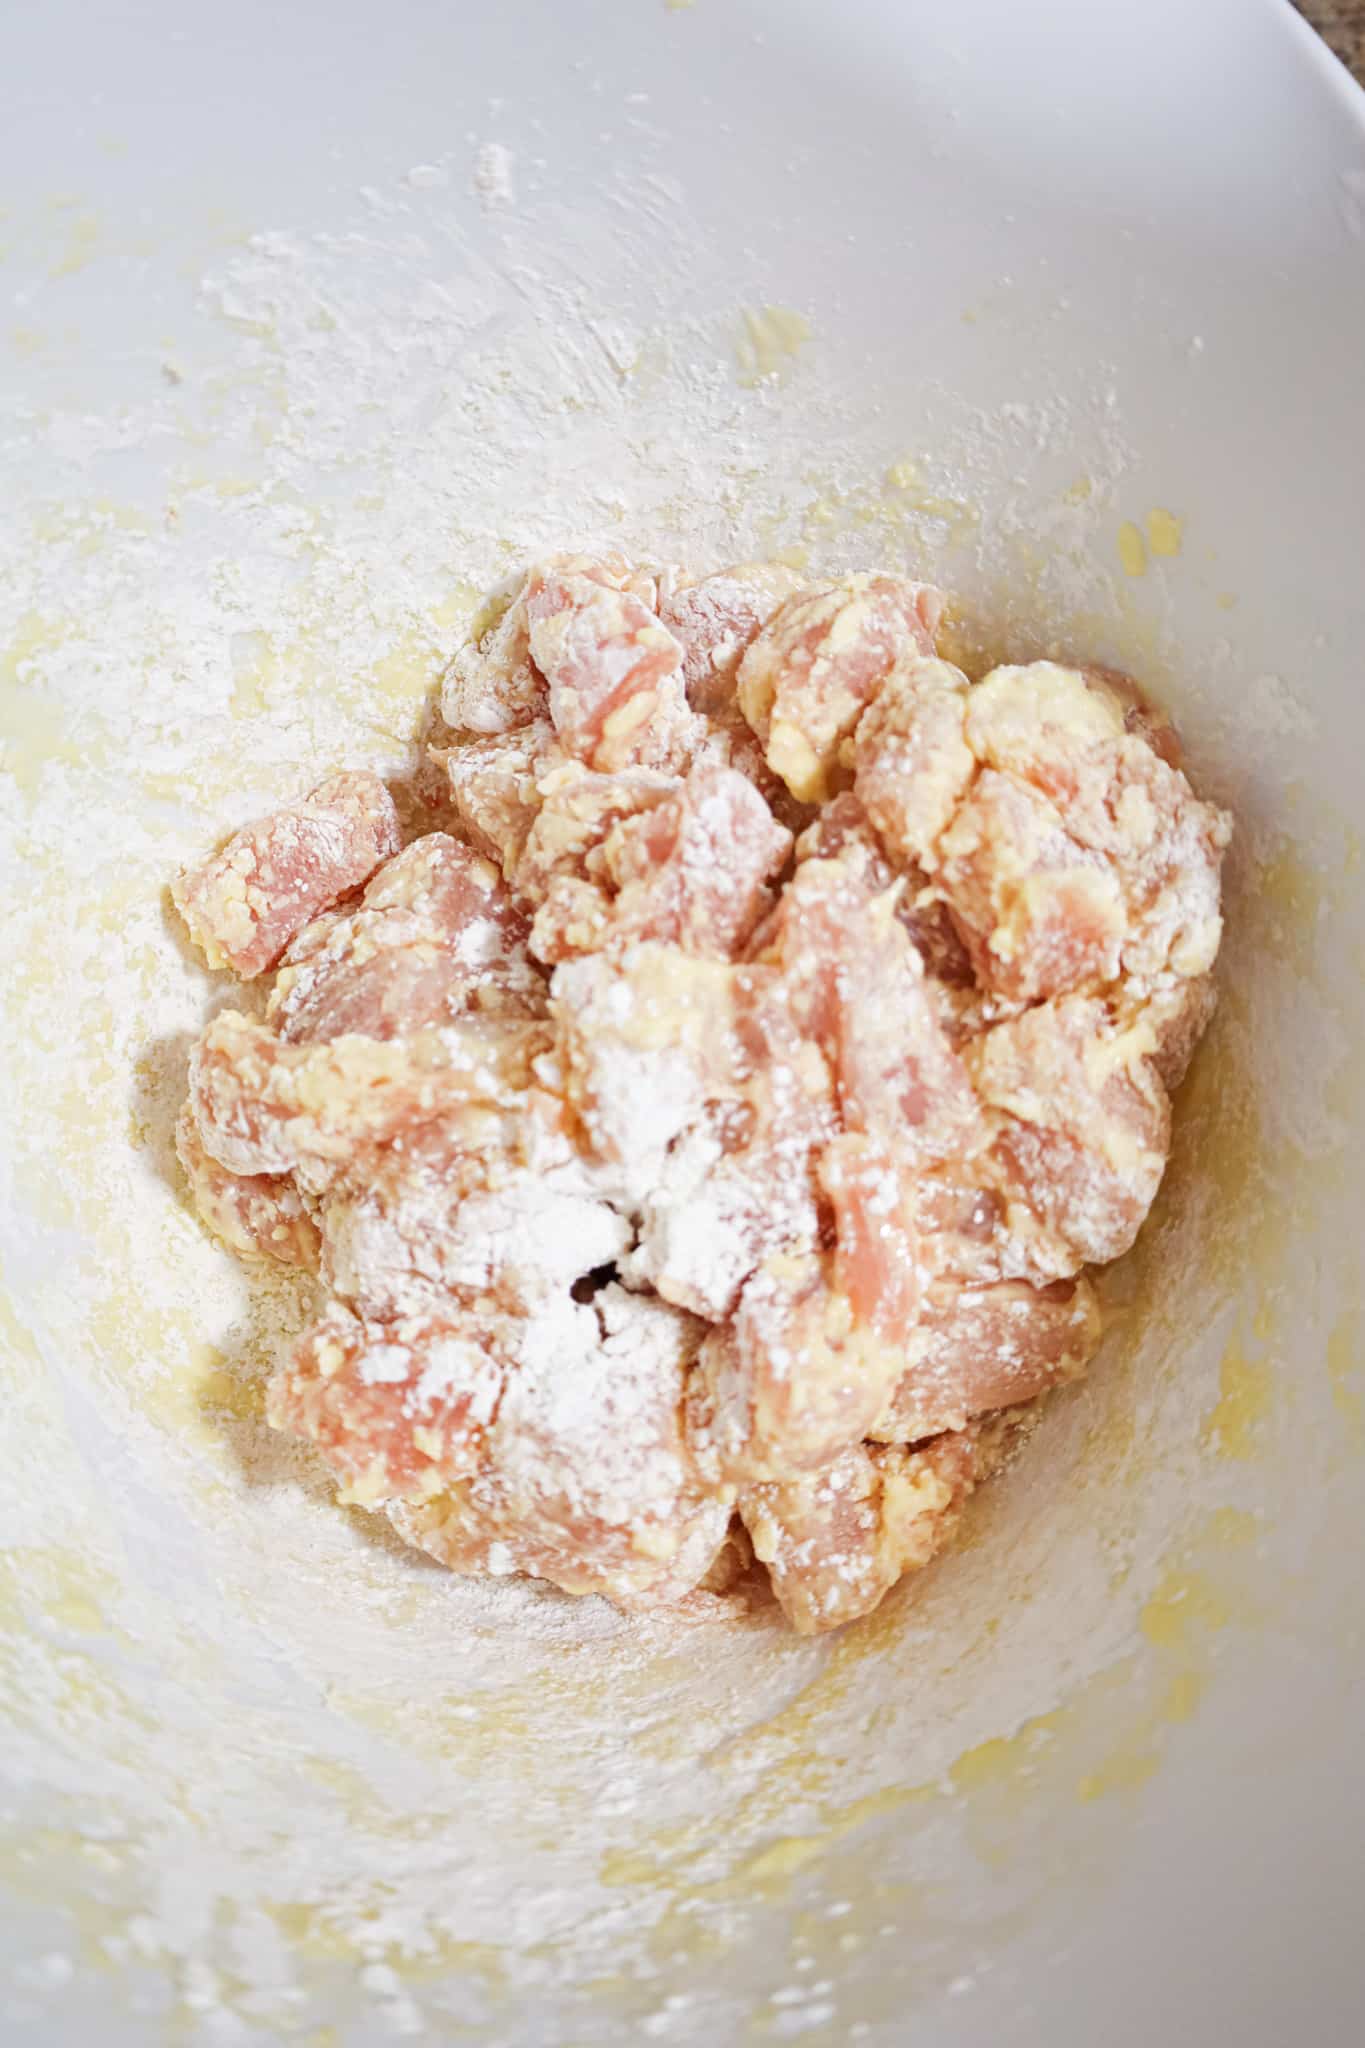 egg and corn starch coated chicken chunks in a mixing bfowl